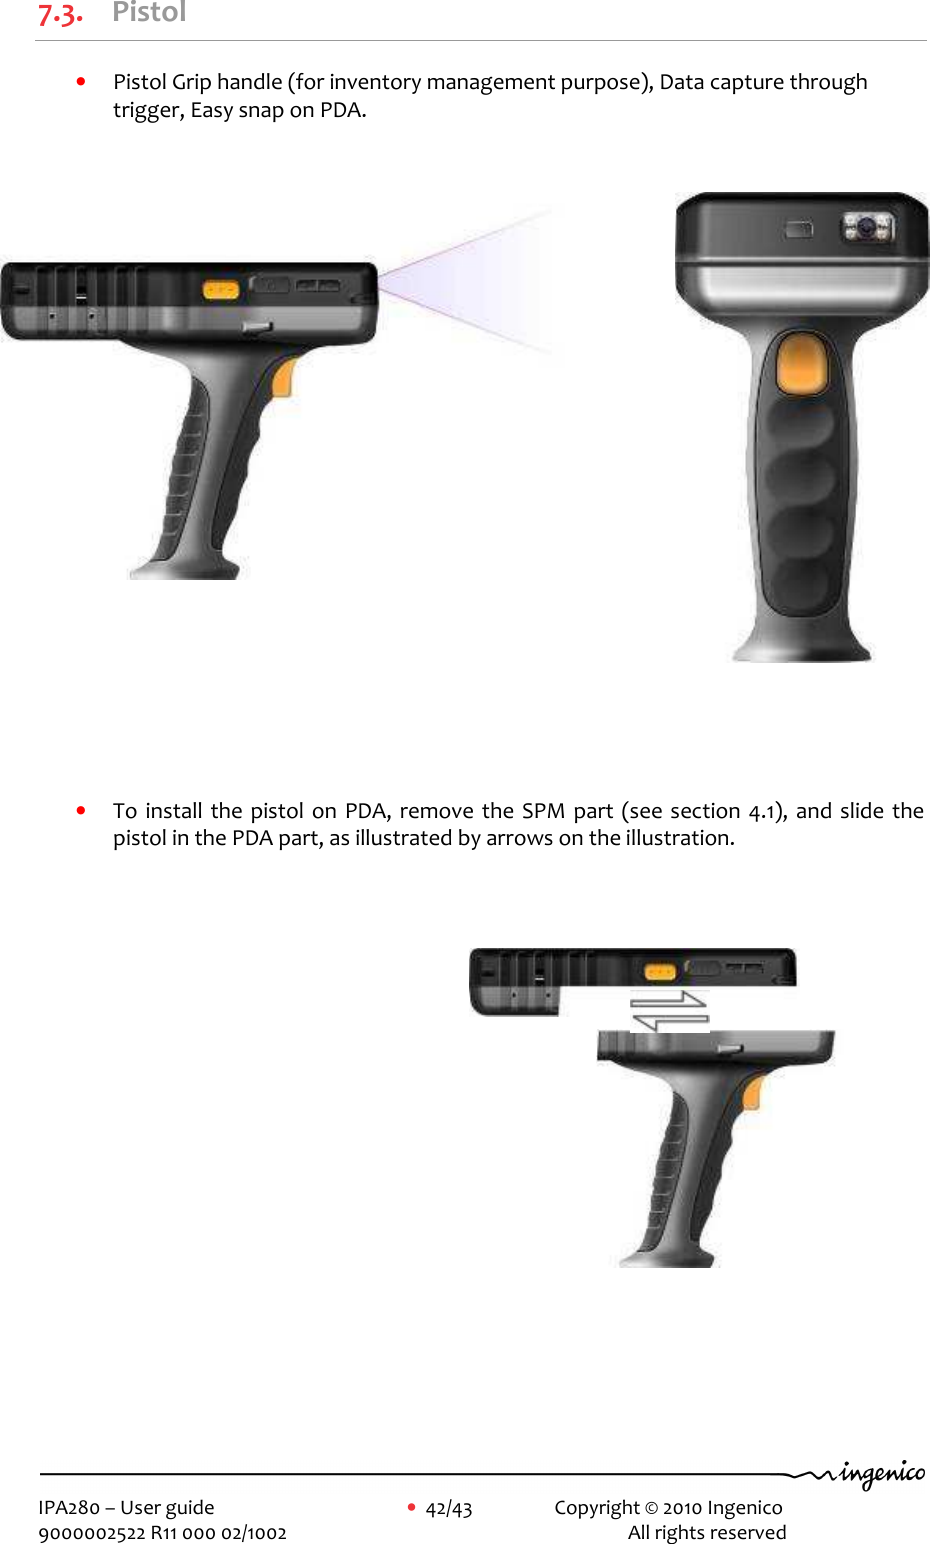     IPA280 – User guide      •  42/43    Copyright © 2010 Ingenico   9000002522 R11 000 02/1002          All rights reserved         7.3. Pistol • Pistol Grip handle (for inventory management purpose), Data capture through trigger, Easy snap on PDA.                          • To install  the pistol on PDA, remove the SPM part (see section 4.1), and slide the pistol in the PDA part, as illustrated by arrows on the illustration.  